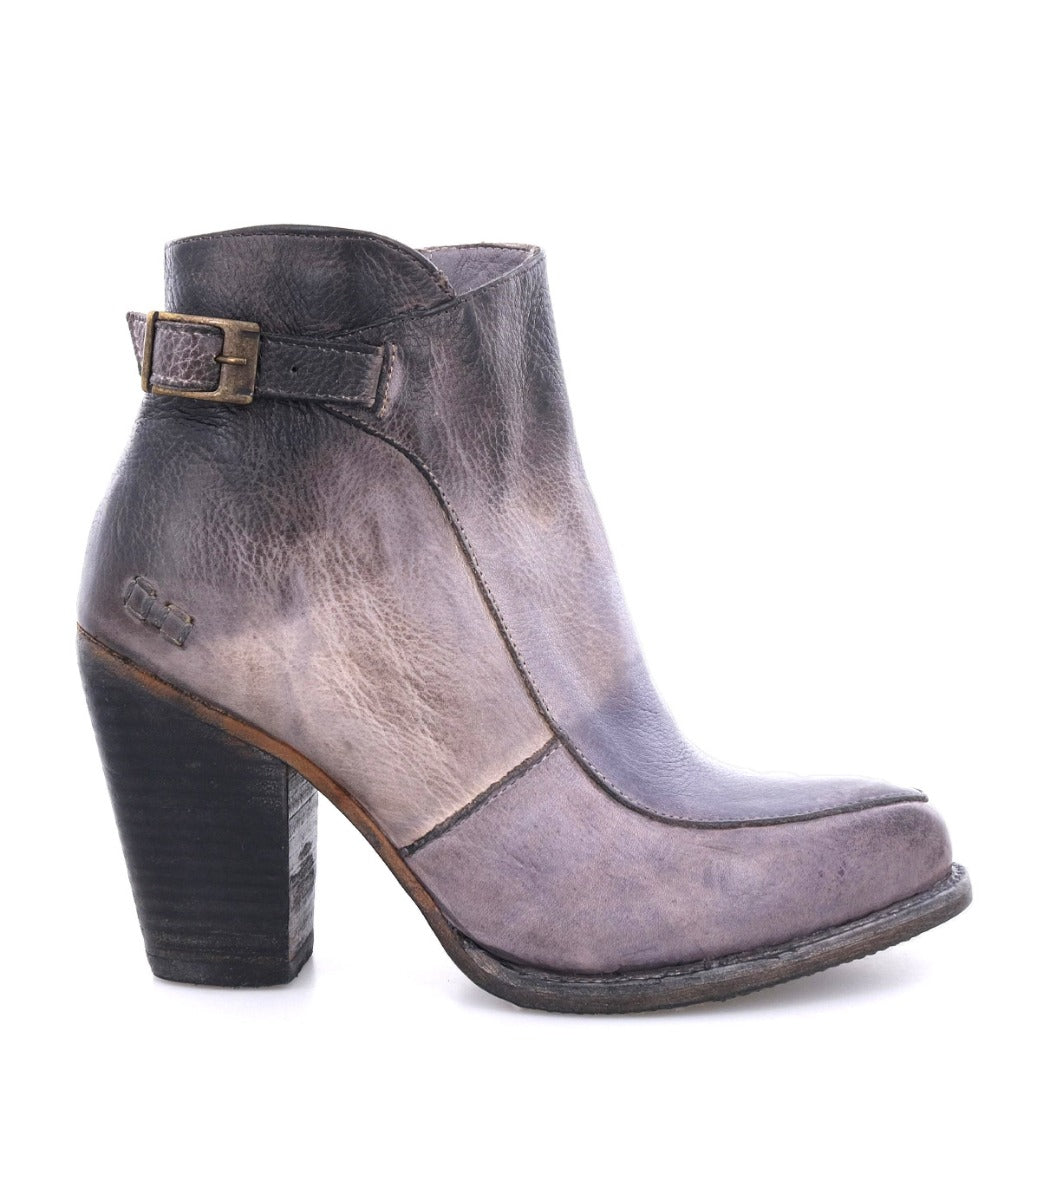 A women's grey leather Isla ankle boot with a buckle by Bed Stu.